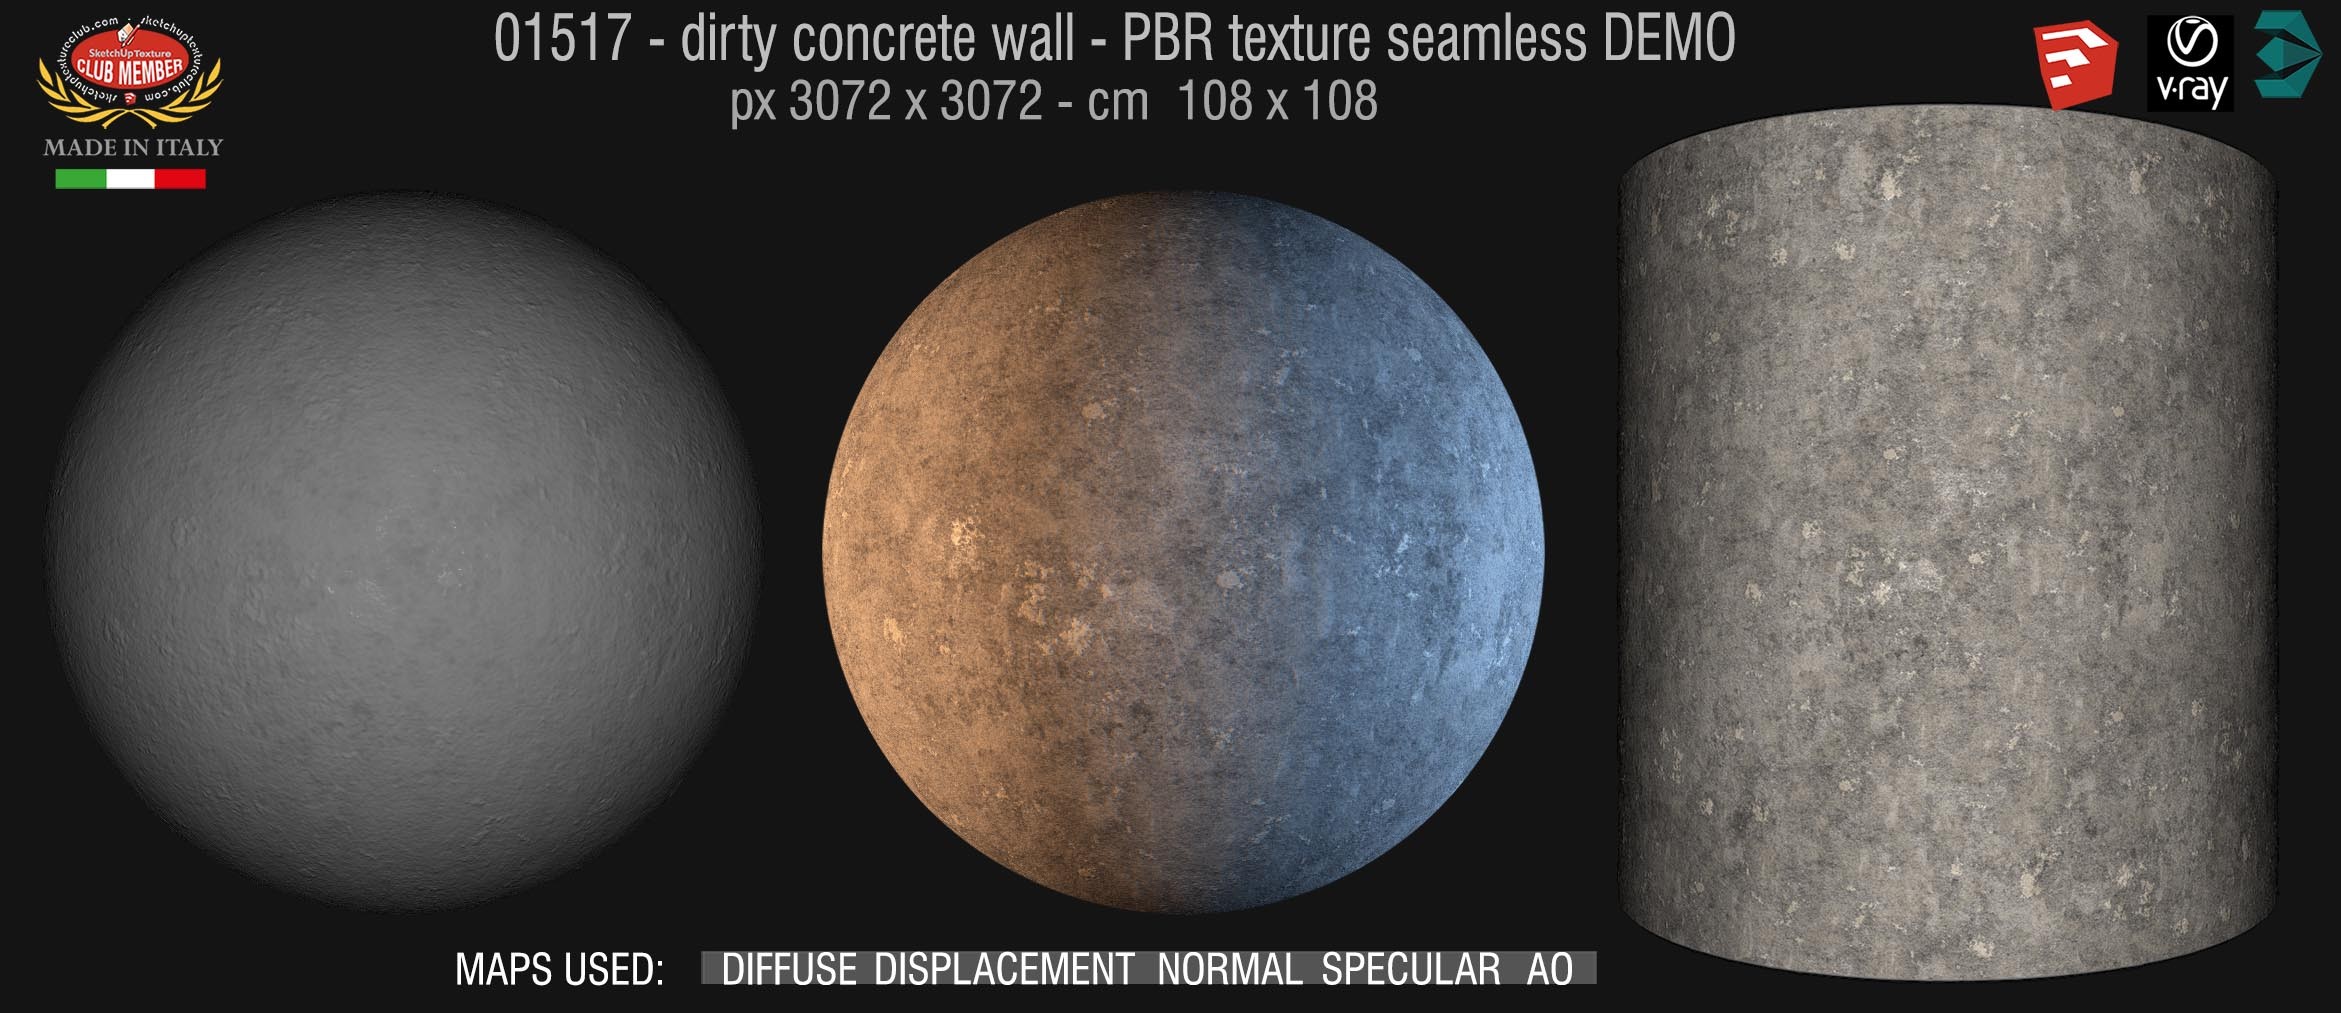 01517 Concrete bare dirty wall PBR texture seamless DEMO